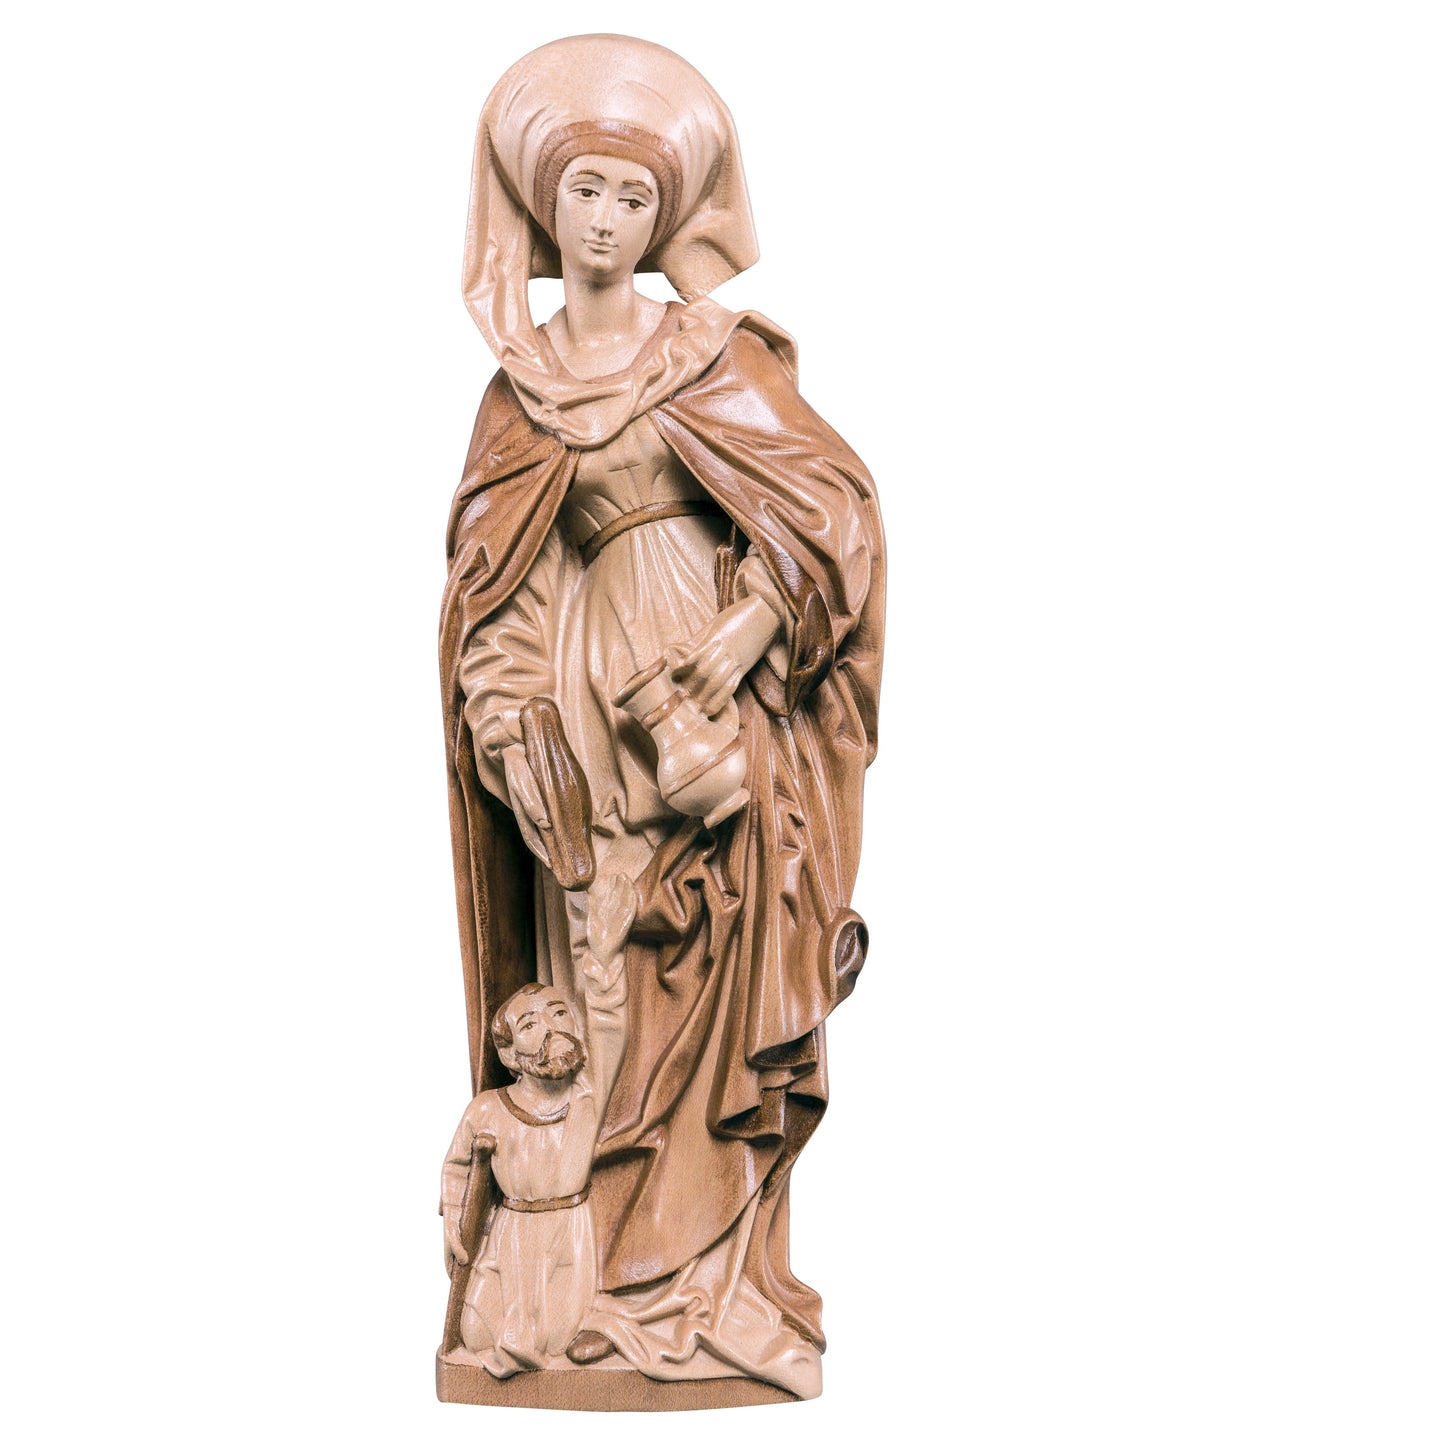 Mondo Cattolico Glossy / 40 cm (15.7 in) Wooden statue of St. Elizabeth with beggar